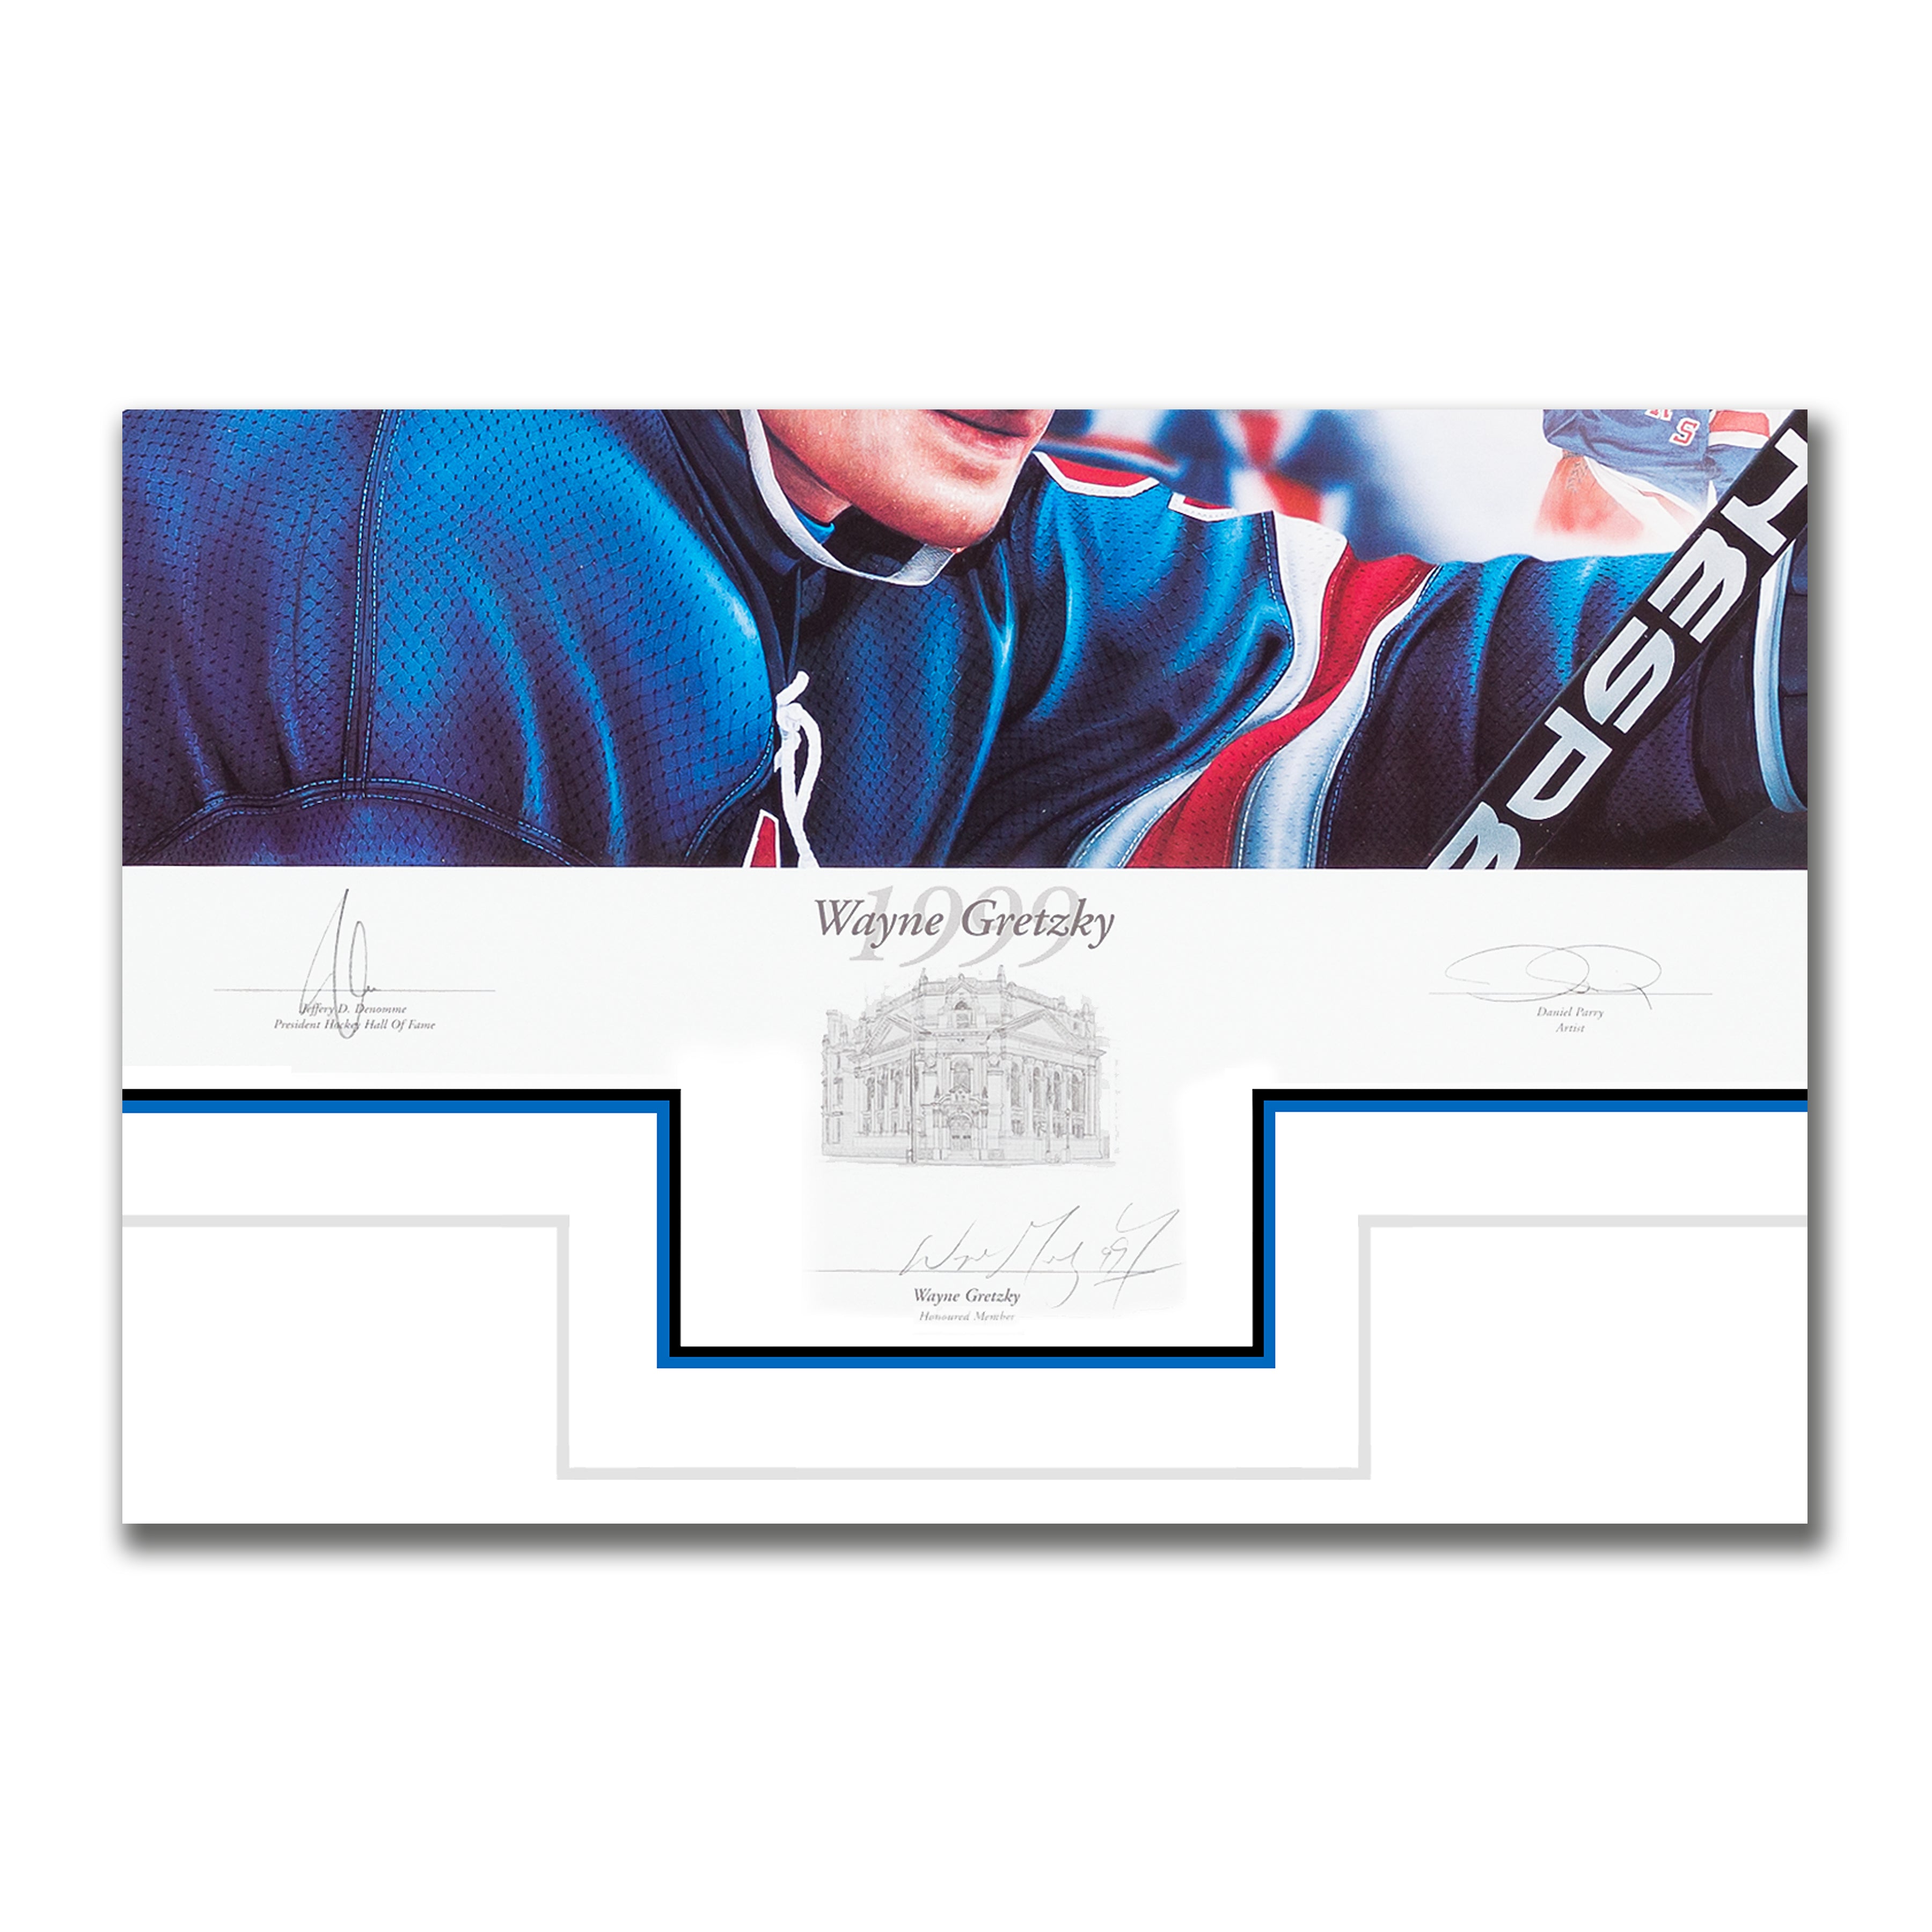 Wayne Gretzky Autographed 20th Anniversary Limited Edition 1999 HHOF Induction Print - Heritage Hockey™